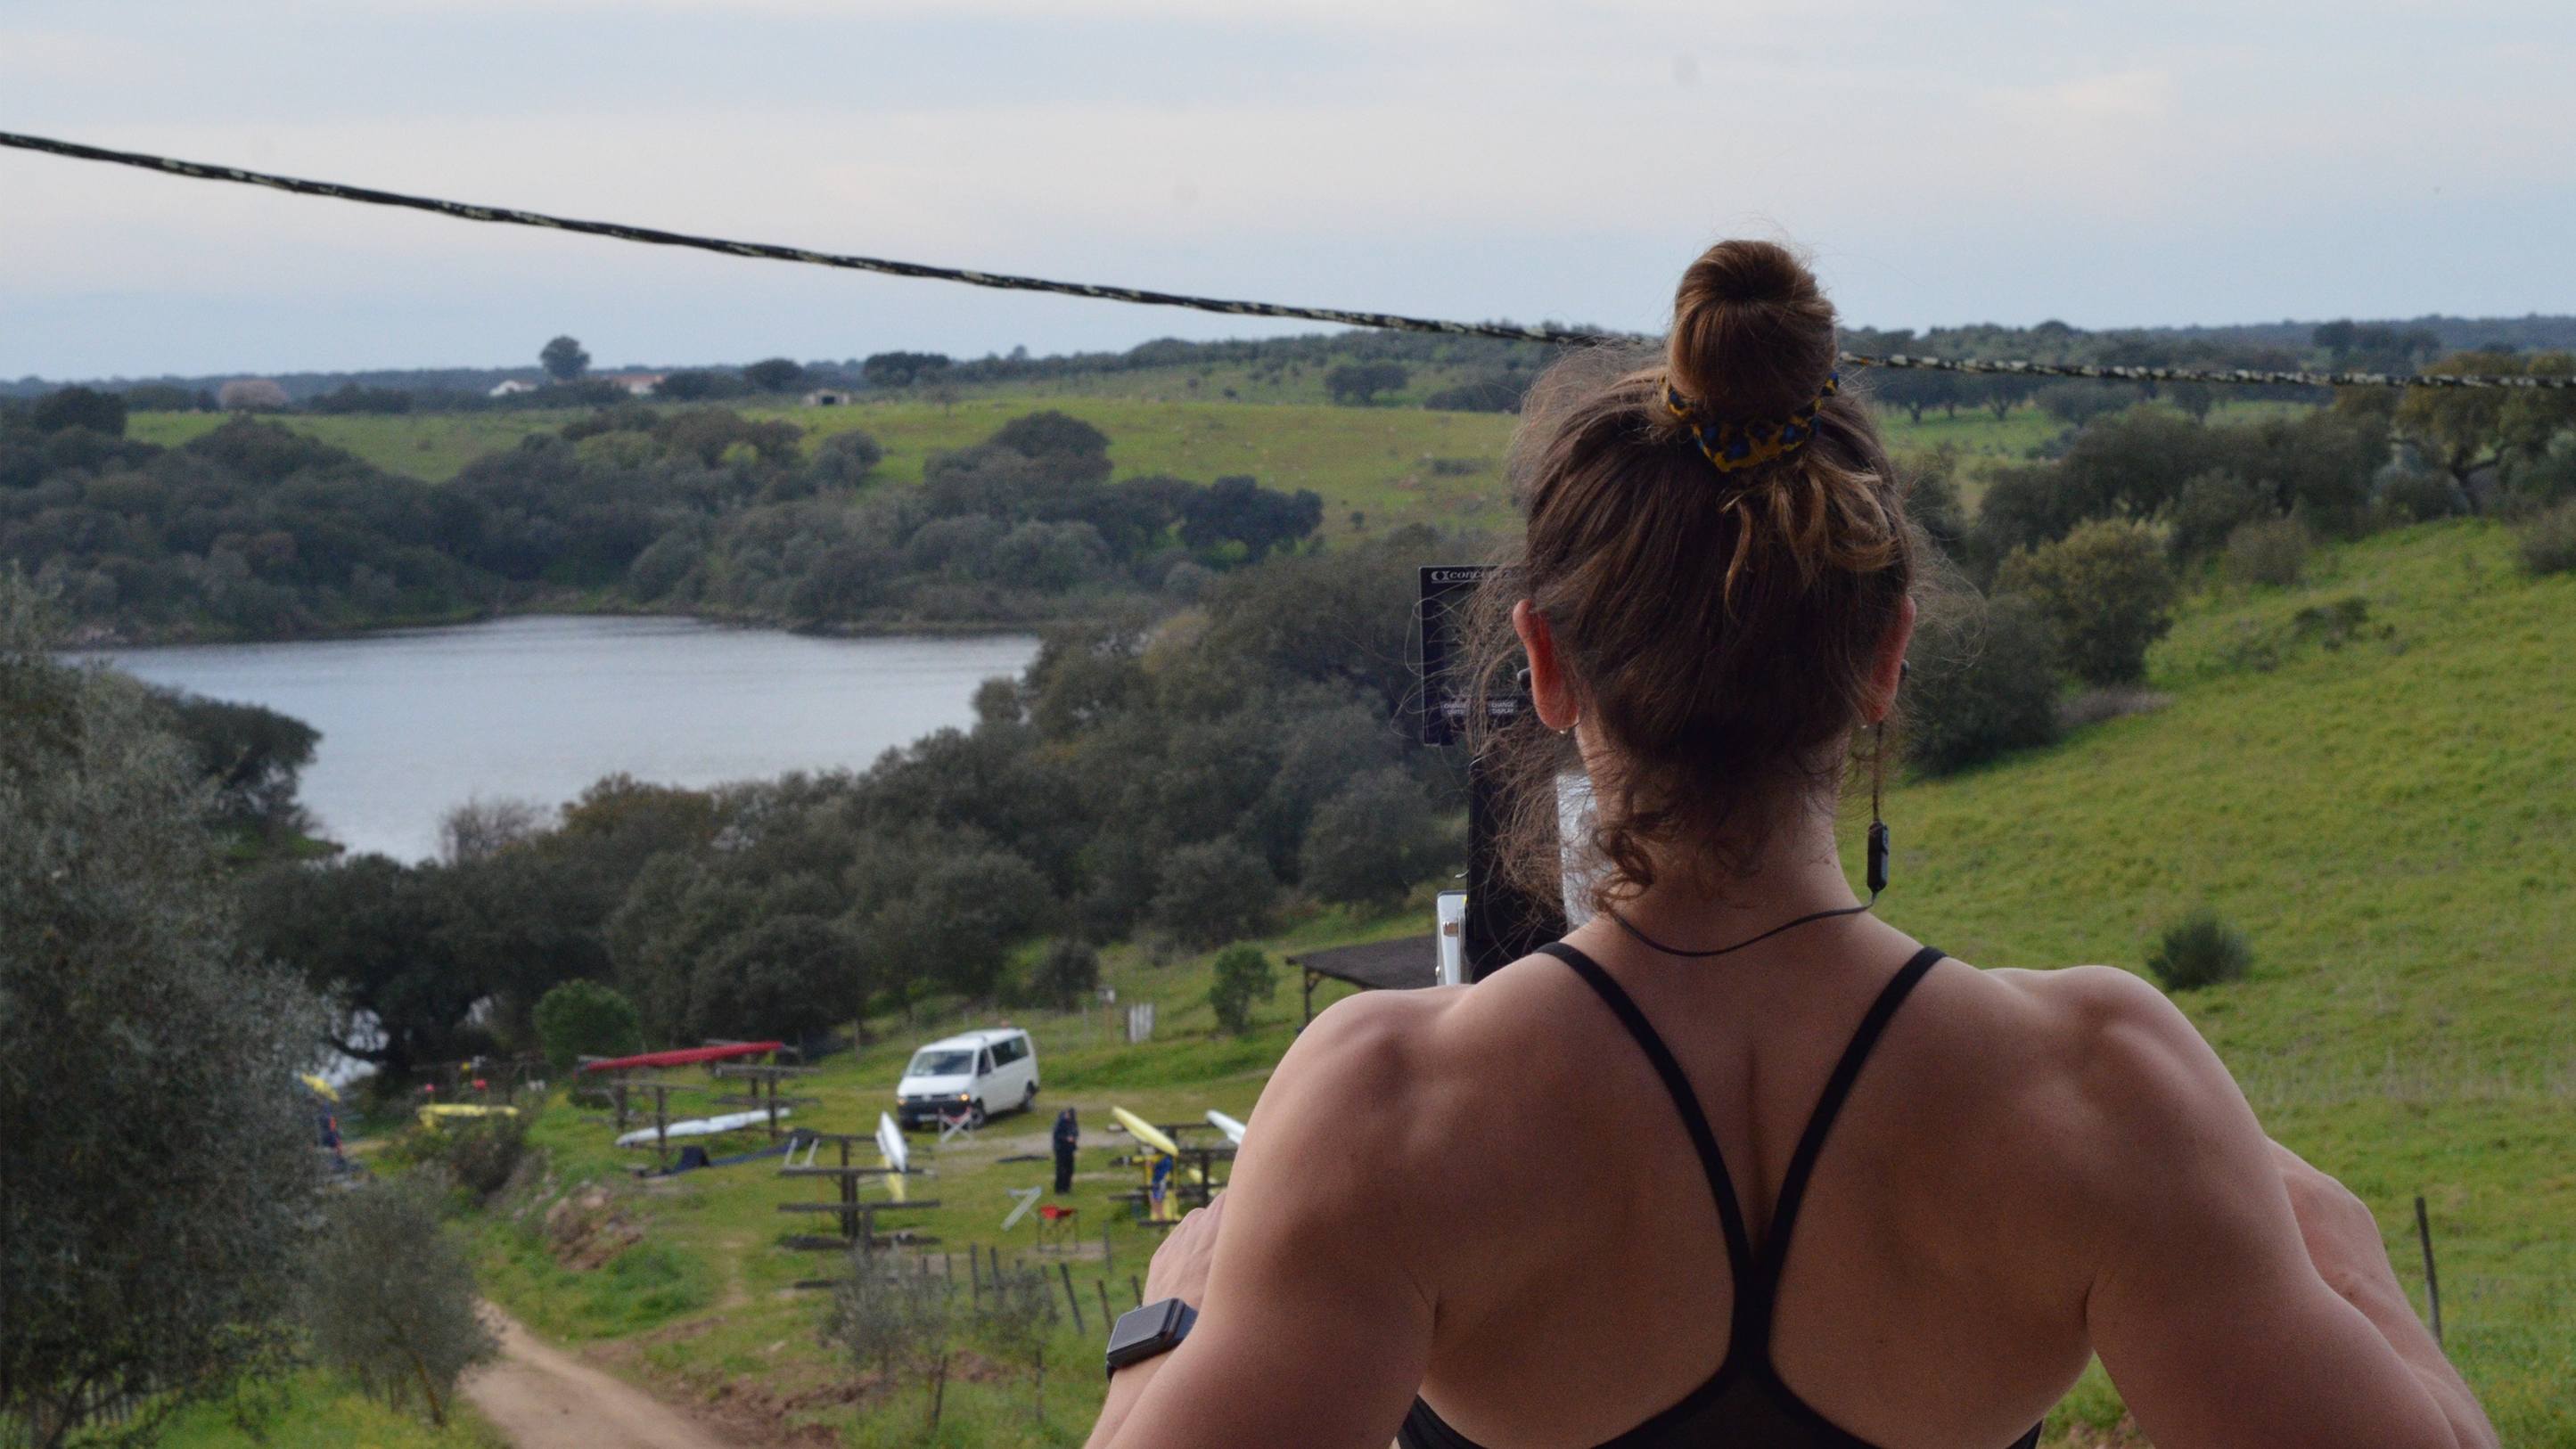 rower on an indoor rowing machine overlooking a lake